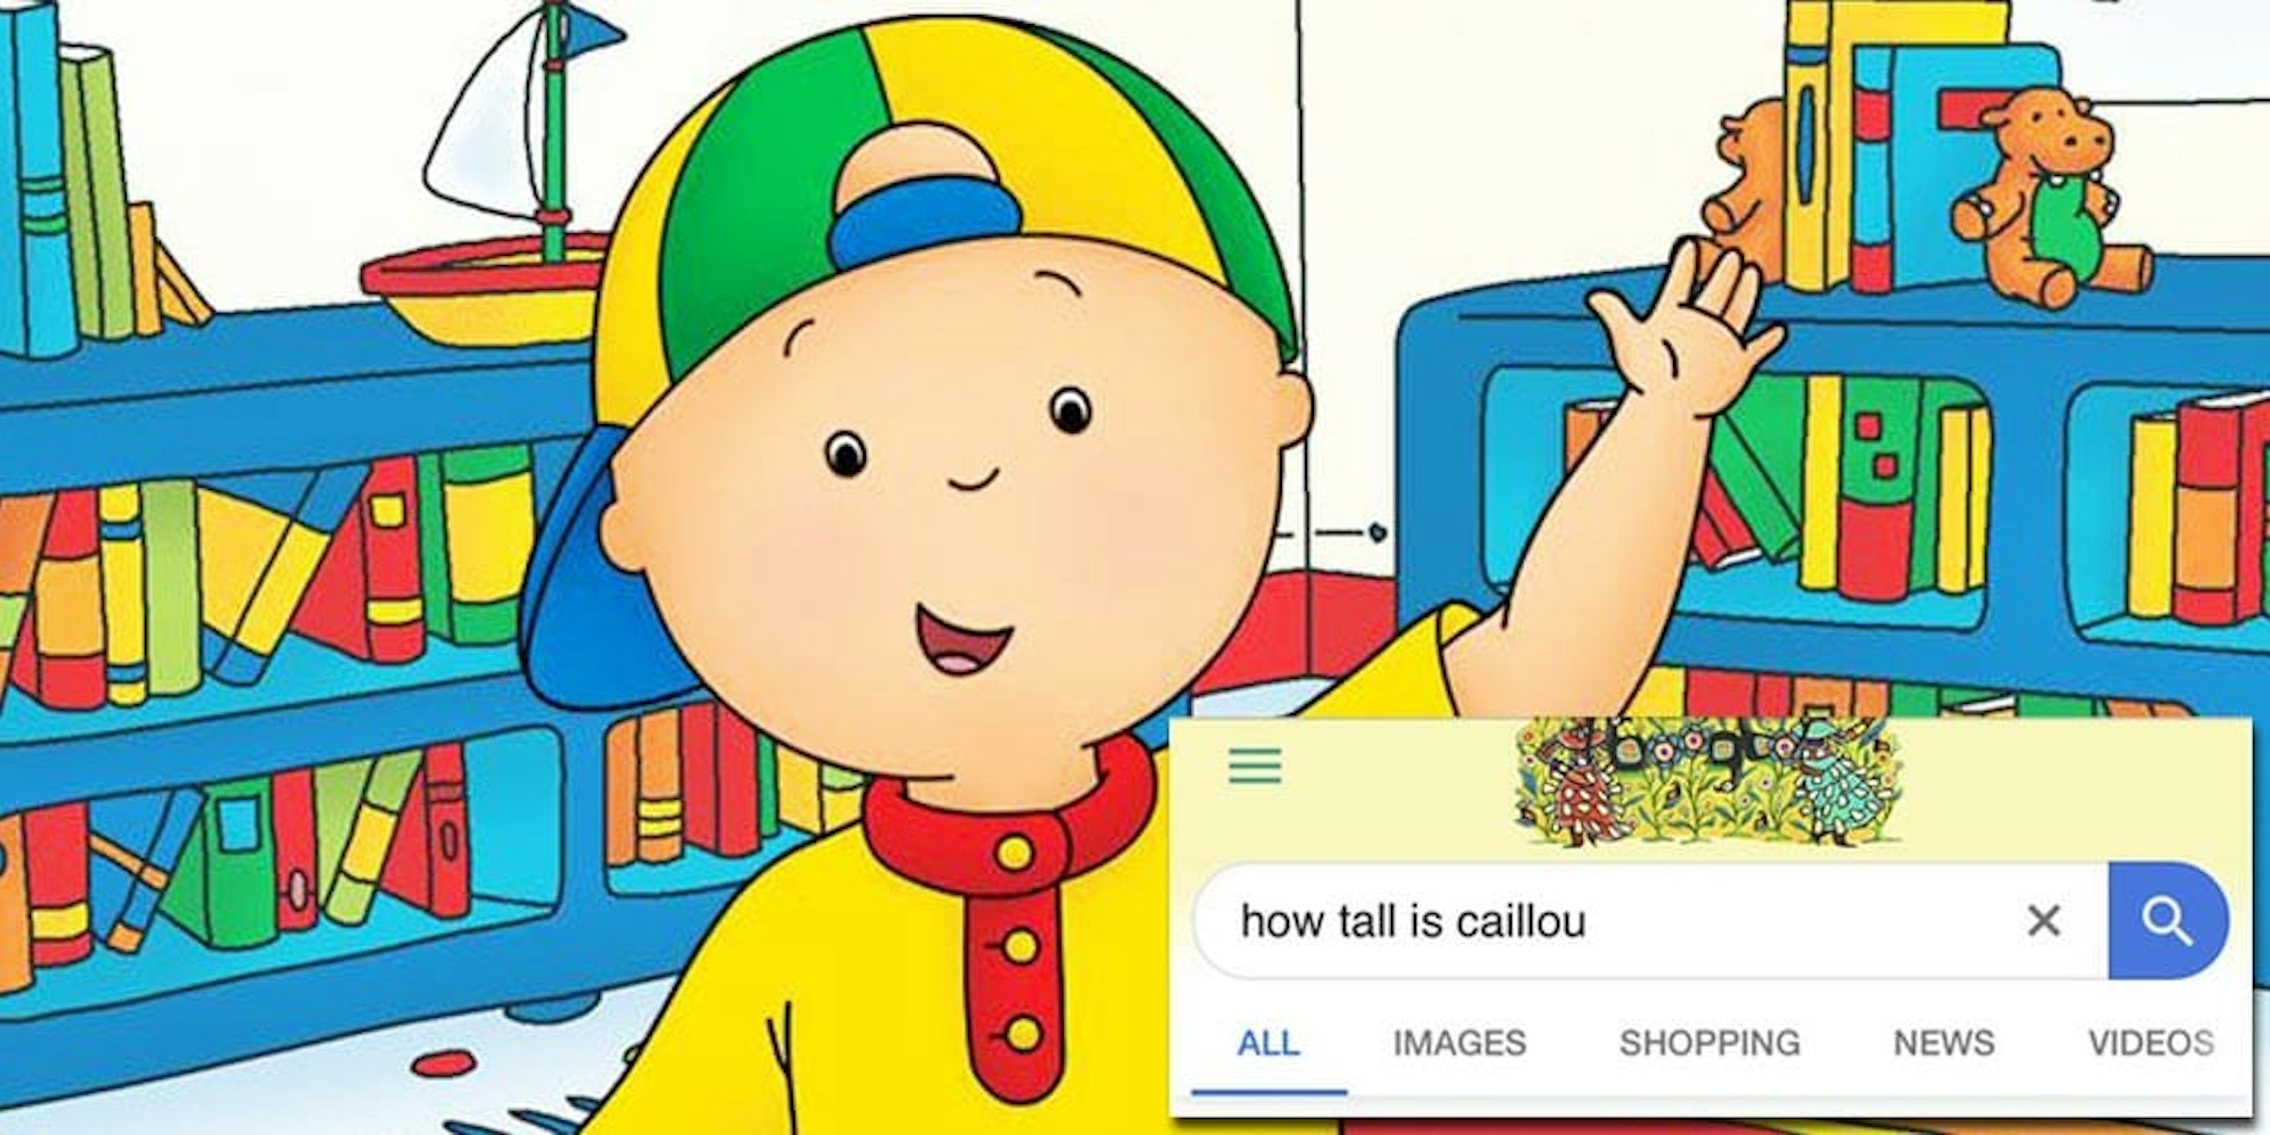 caillou-height-twitter